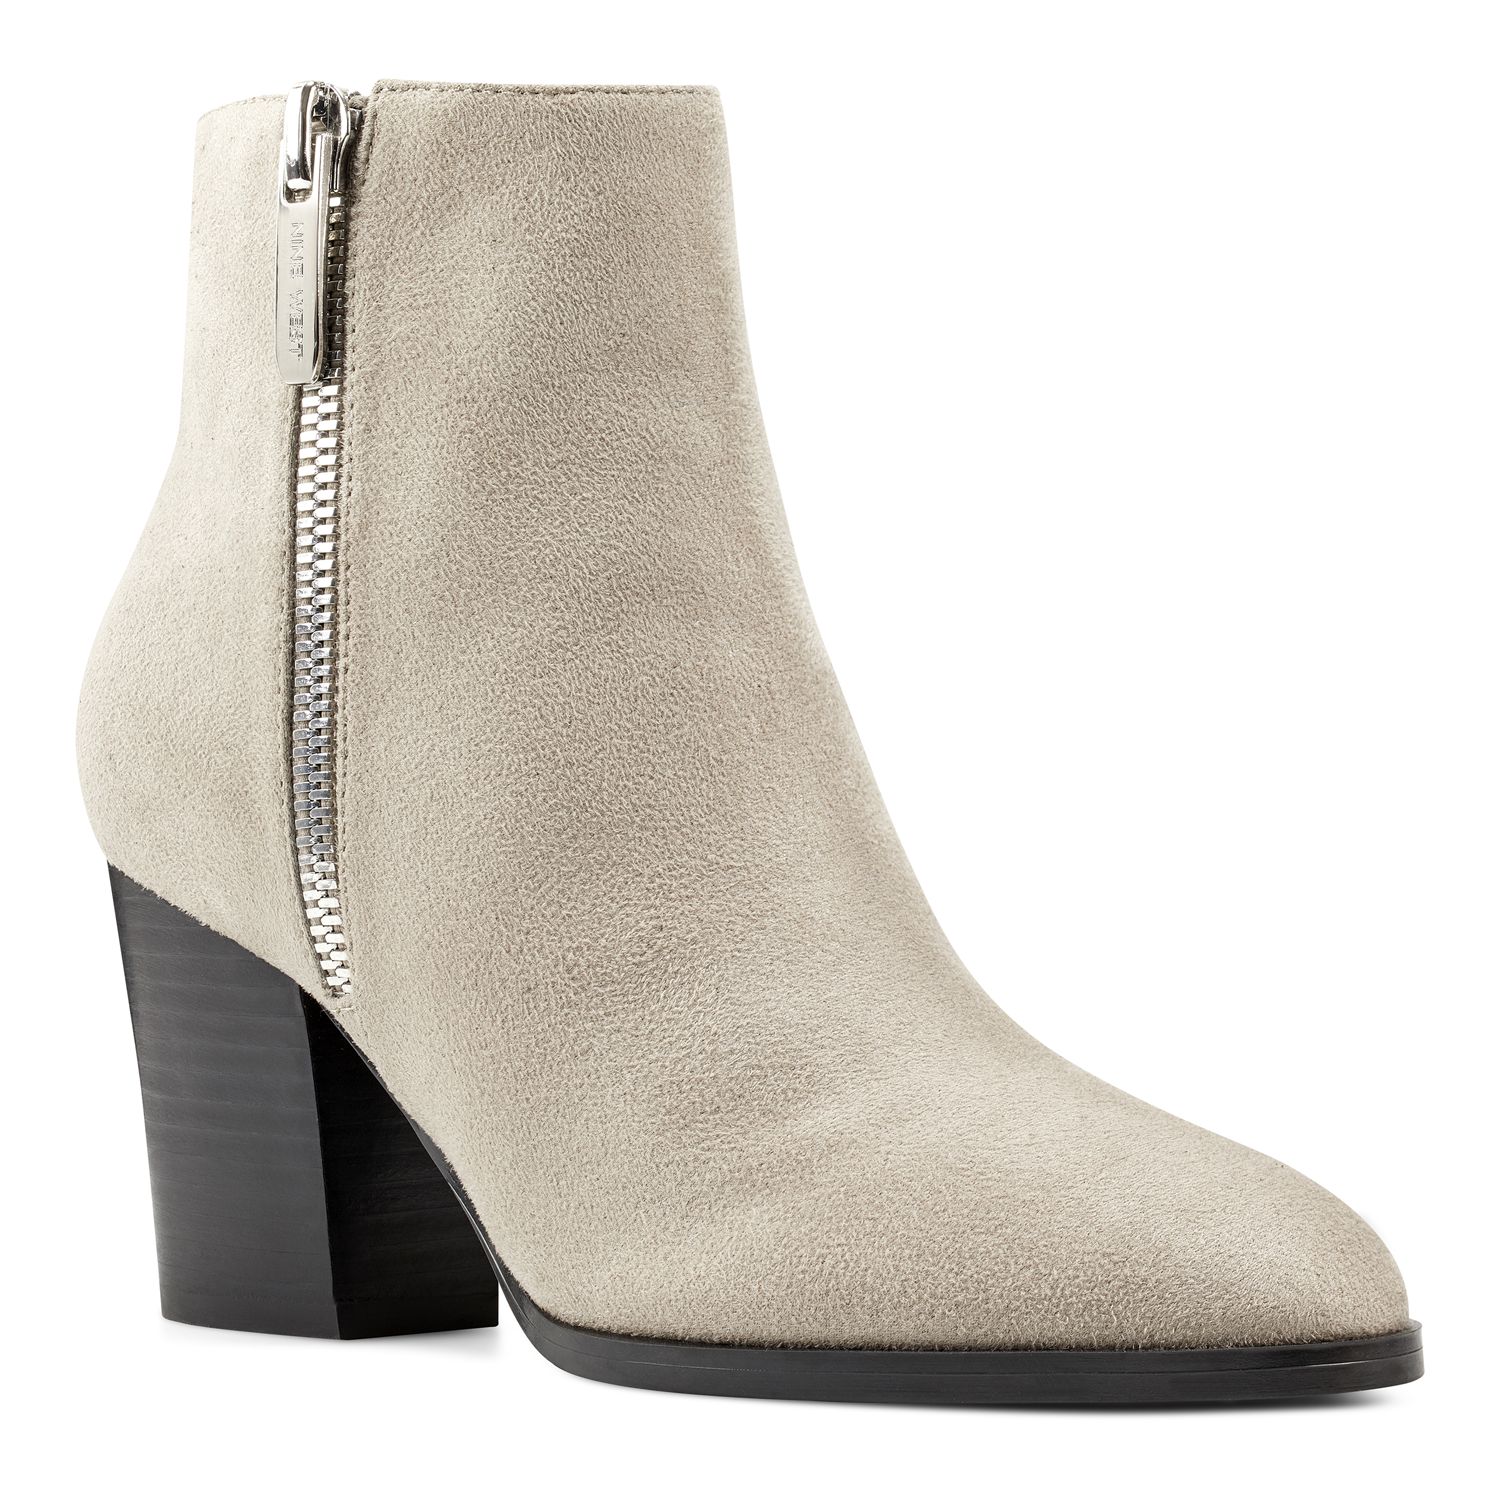 gray ankle boots